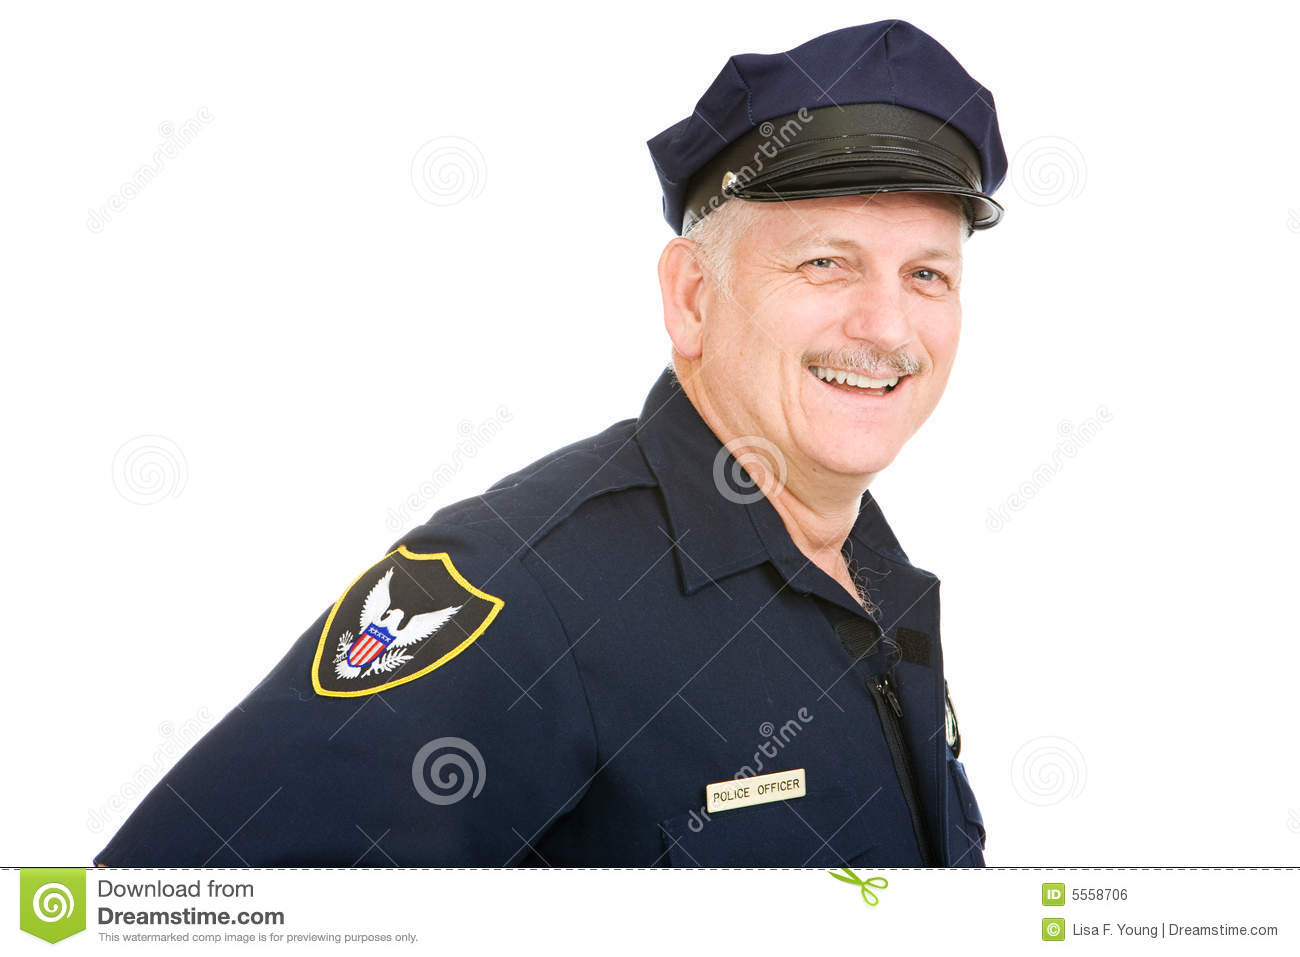 Officer Friendly Royalty Free Stock Image   Image  5558706